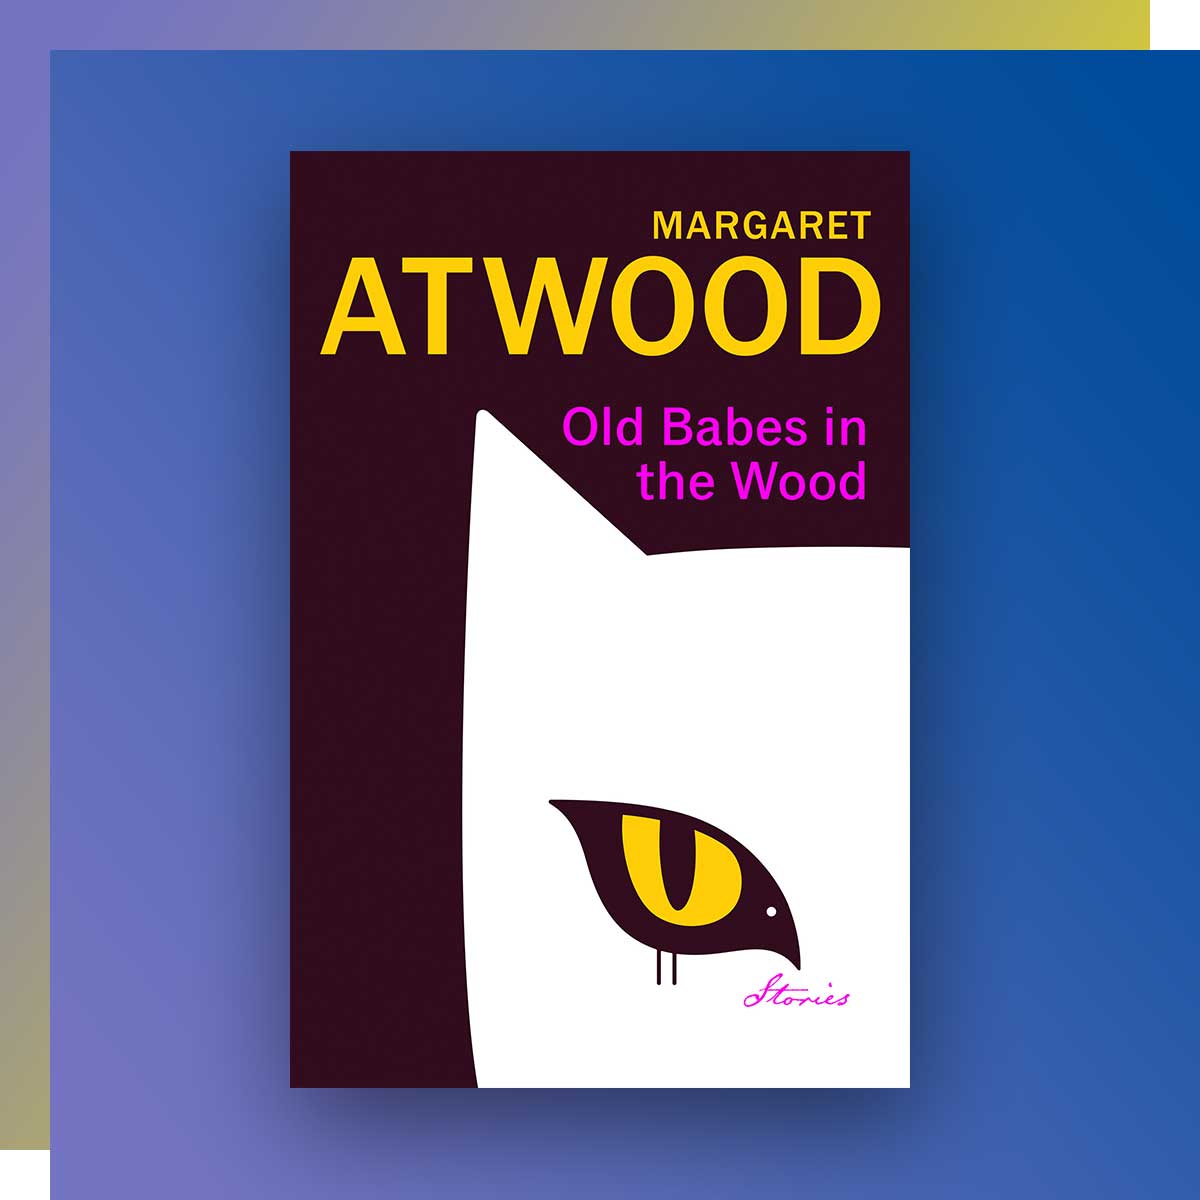 Old Babes in the Woods by Margaret Atwood